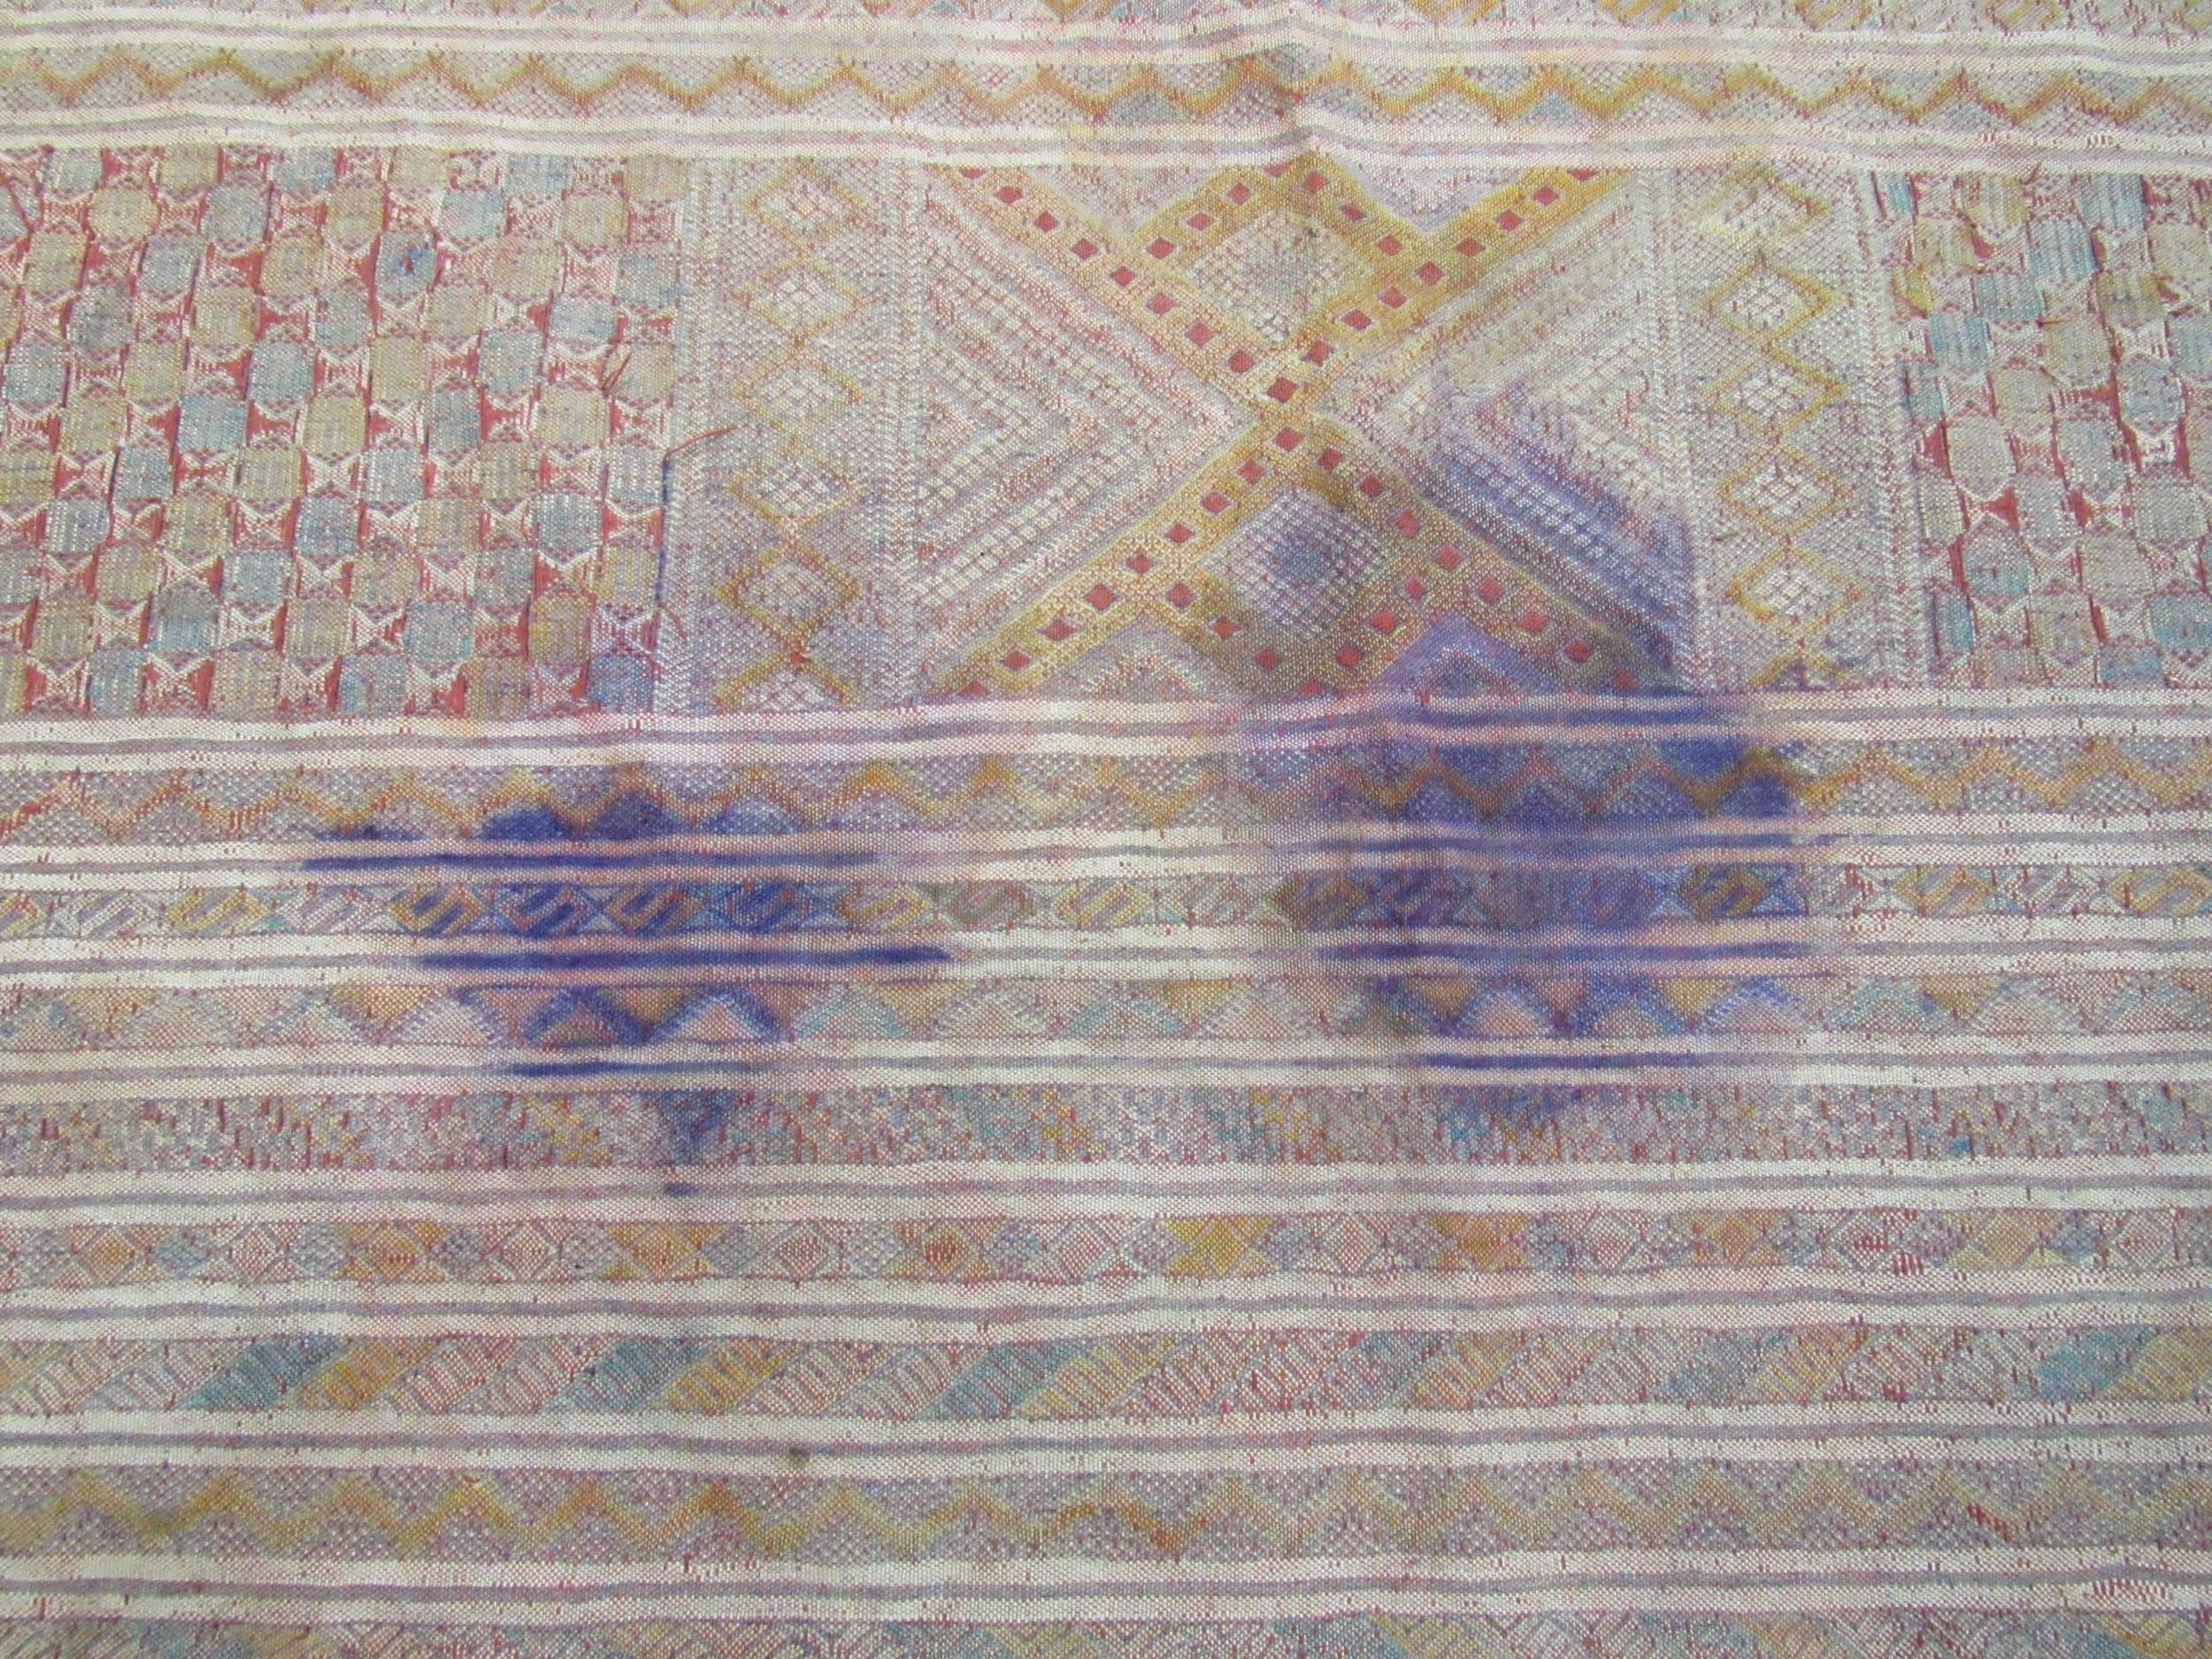 An Eastern hand woven geometric design rug, badly stained, a/f, 316cm x 178cm - Image 2 of 6